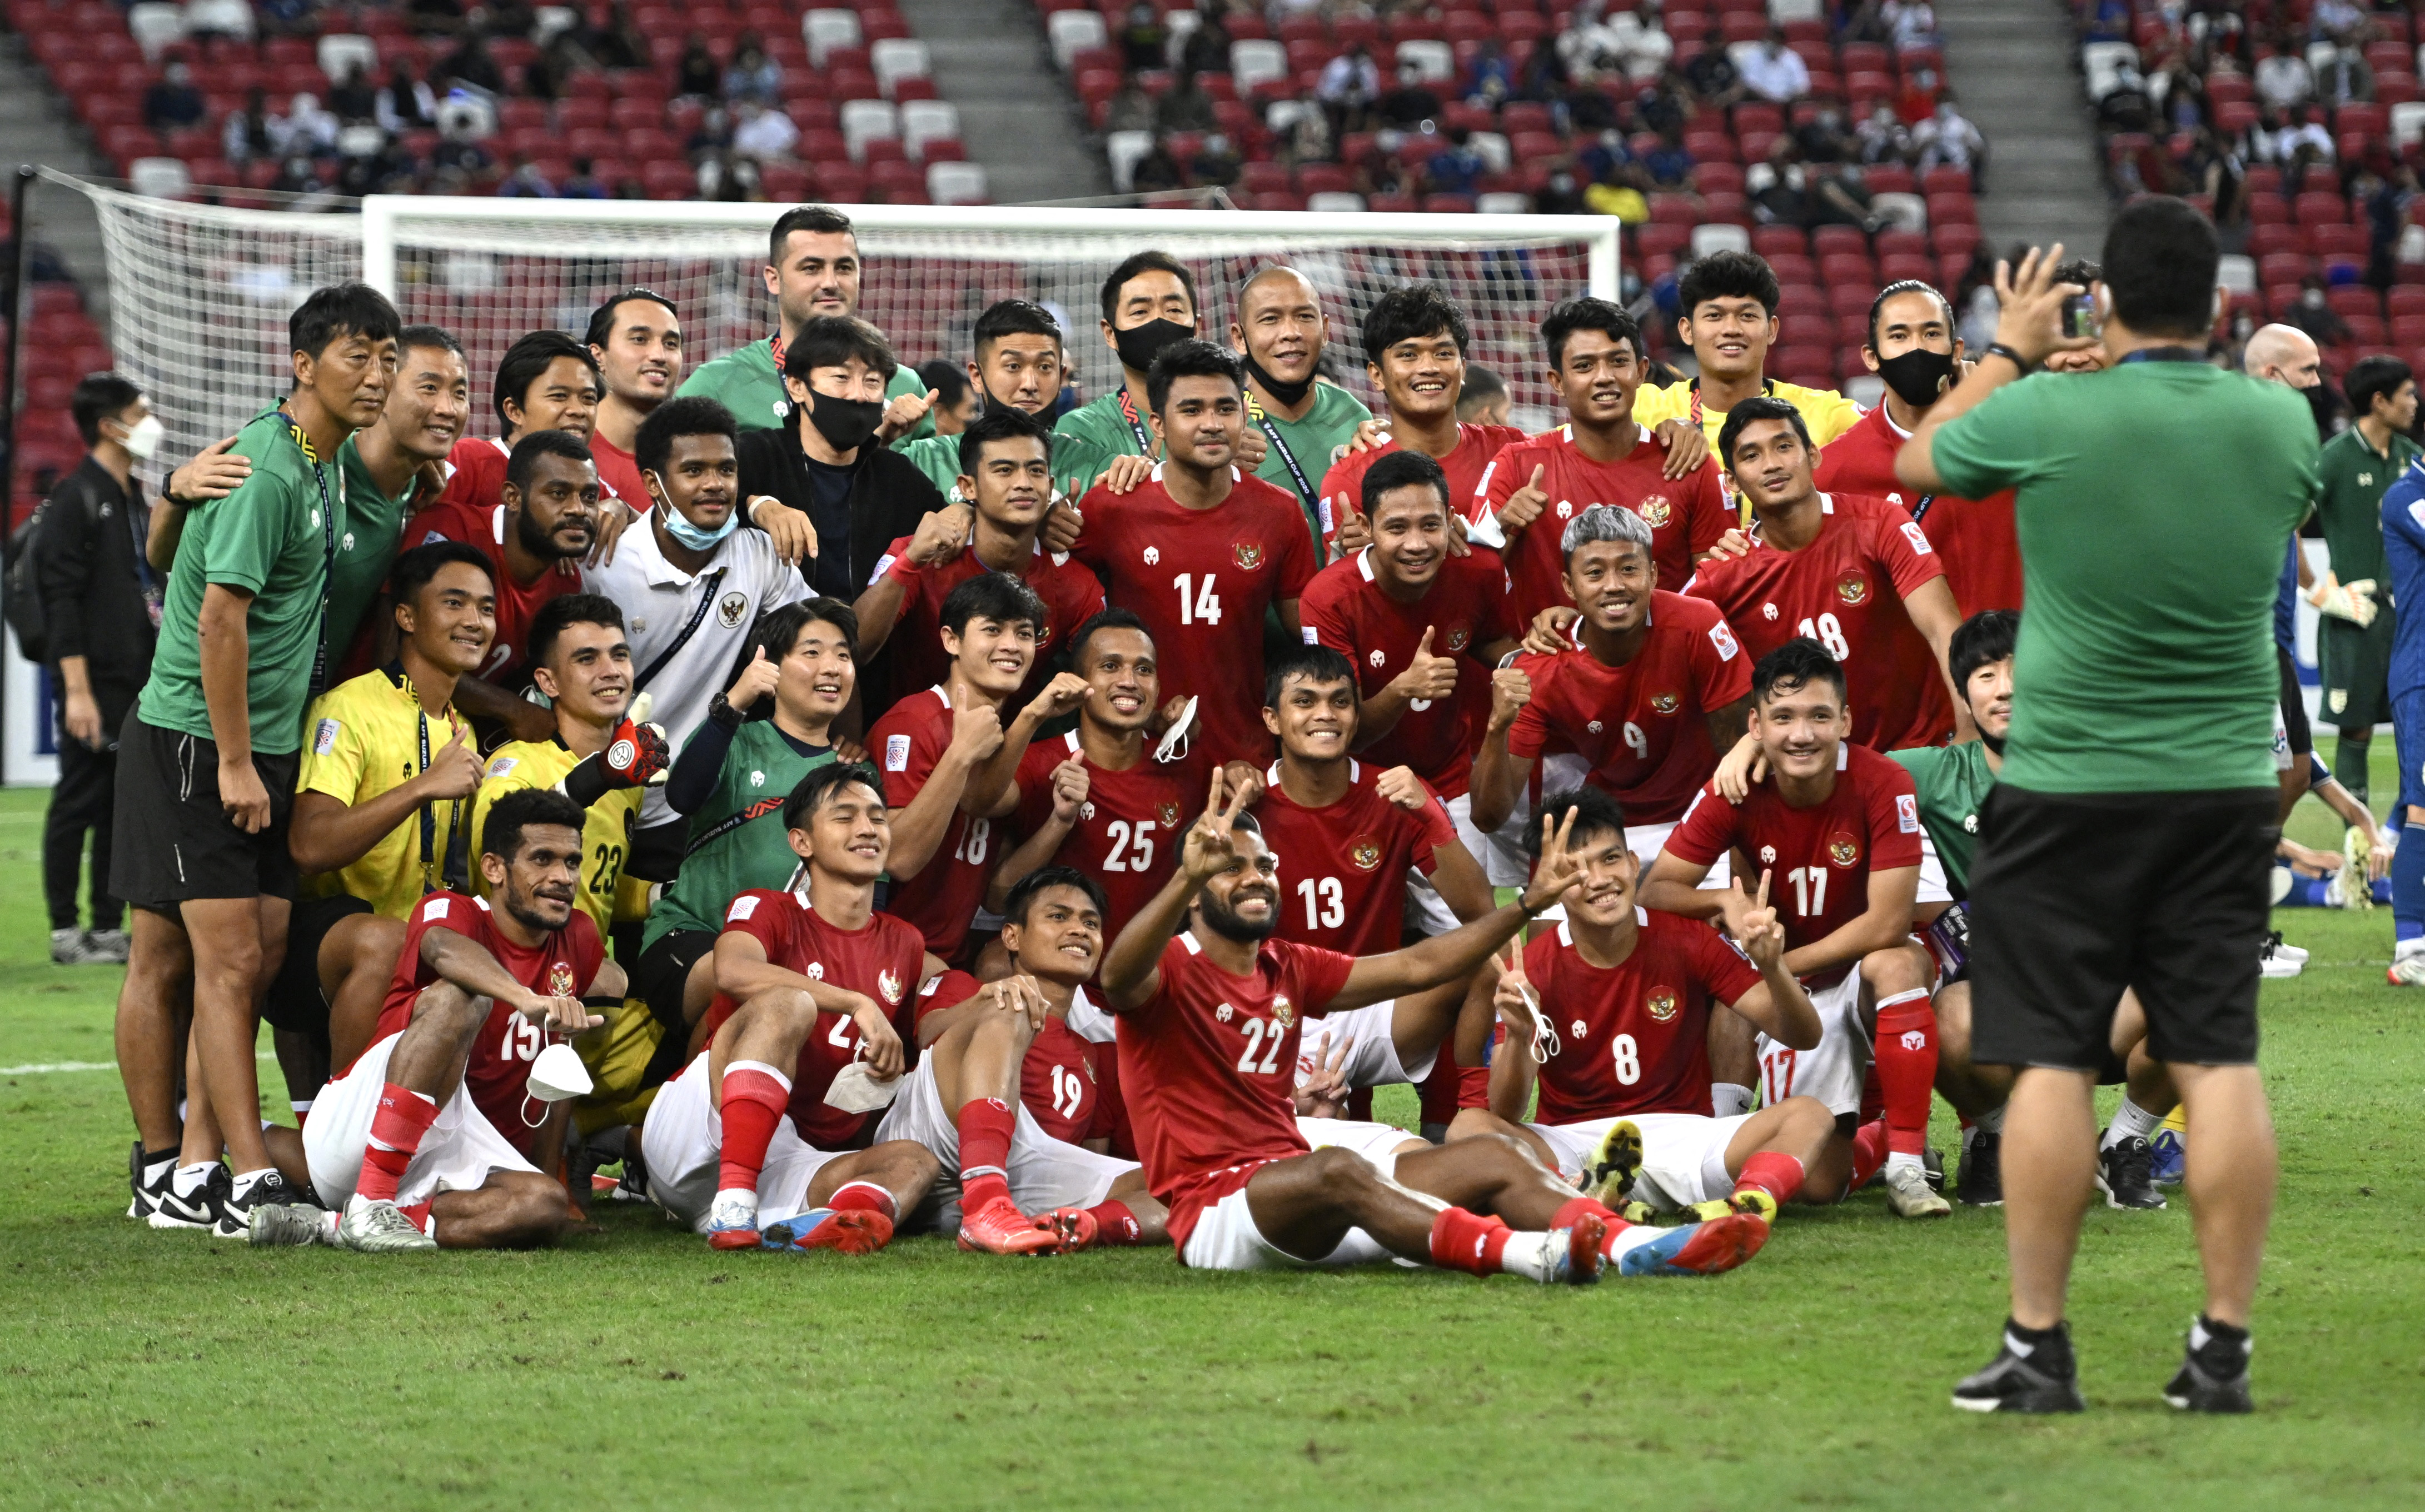 Soccer Football - Suzuki Cup - Final - Second Leg - Thailand v Indonesia - National Stadium, Singapore - January 1, 2022 Indonesia players pose for a photograph after the match REUTERS/Caroline Chia